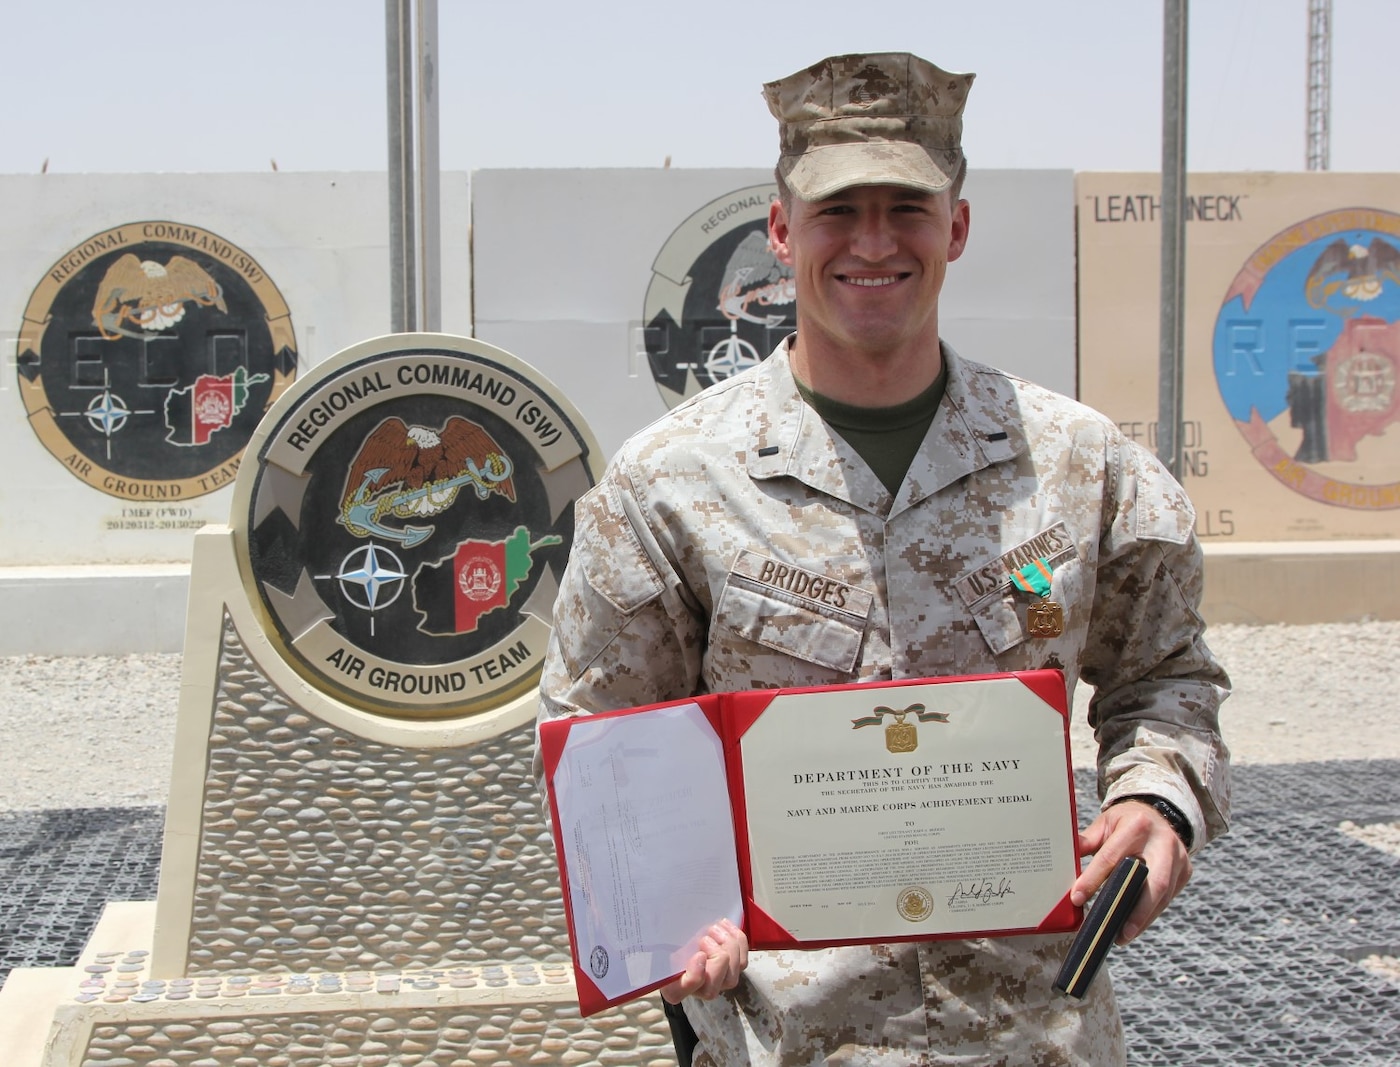 First Lt. Joshua Bridges, a native of Morganton, N.C., and assessments and plans officer, Regional Command (Southwest), poses for a photo after being  awarded a Navy and Marine Corps Achievement Medal during a ceremony aboard Camp Leatherneck, Afghanistan, July 13, 2014. Bridges deployed to Helmand province during Jan. 2014 and was vital to RC(SW) planning efforts during the 2014 Afghan presidential elections and the upcoming transition of full security responsibility to the Afghan National Security Forces in the region by the end of 2014.